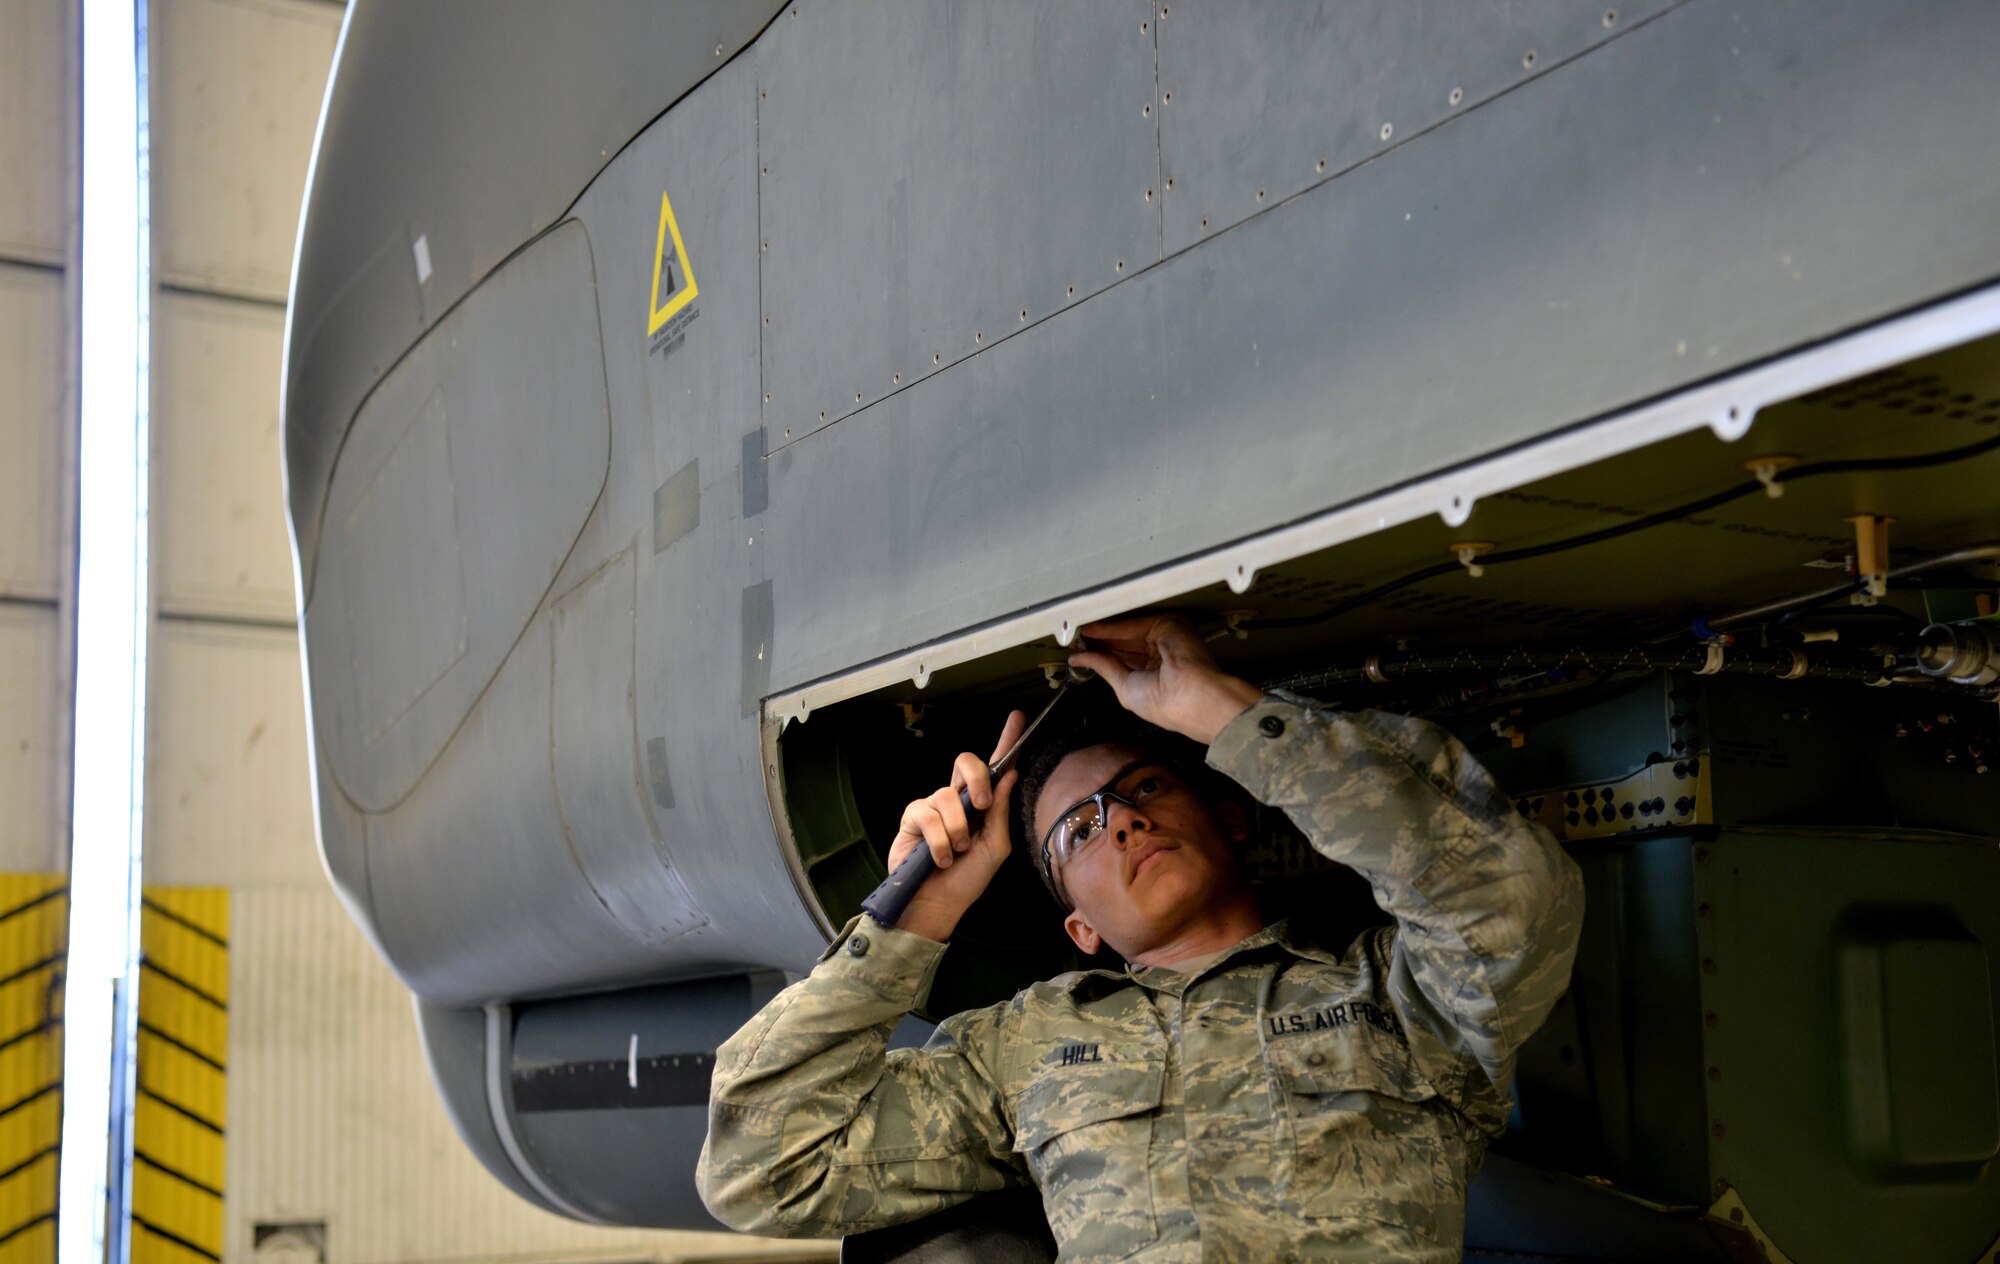 Airman 1st Class Gregory Hill, 9th Maintenance Squadron aircraft structural maintenance technician, shapes a part on an RQ-4 Global Hawk